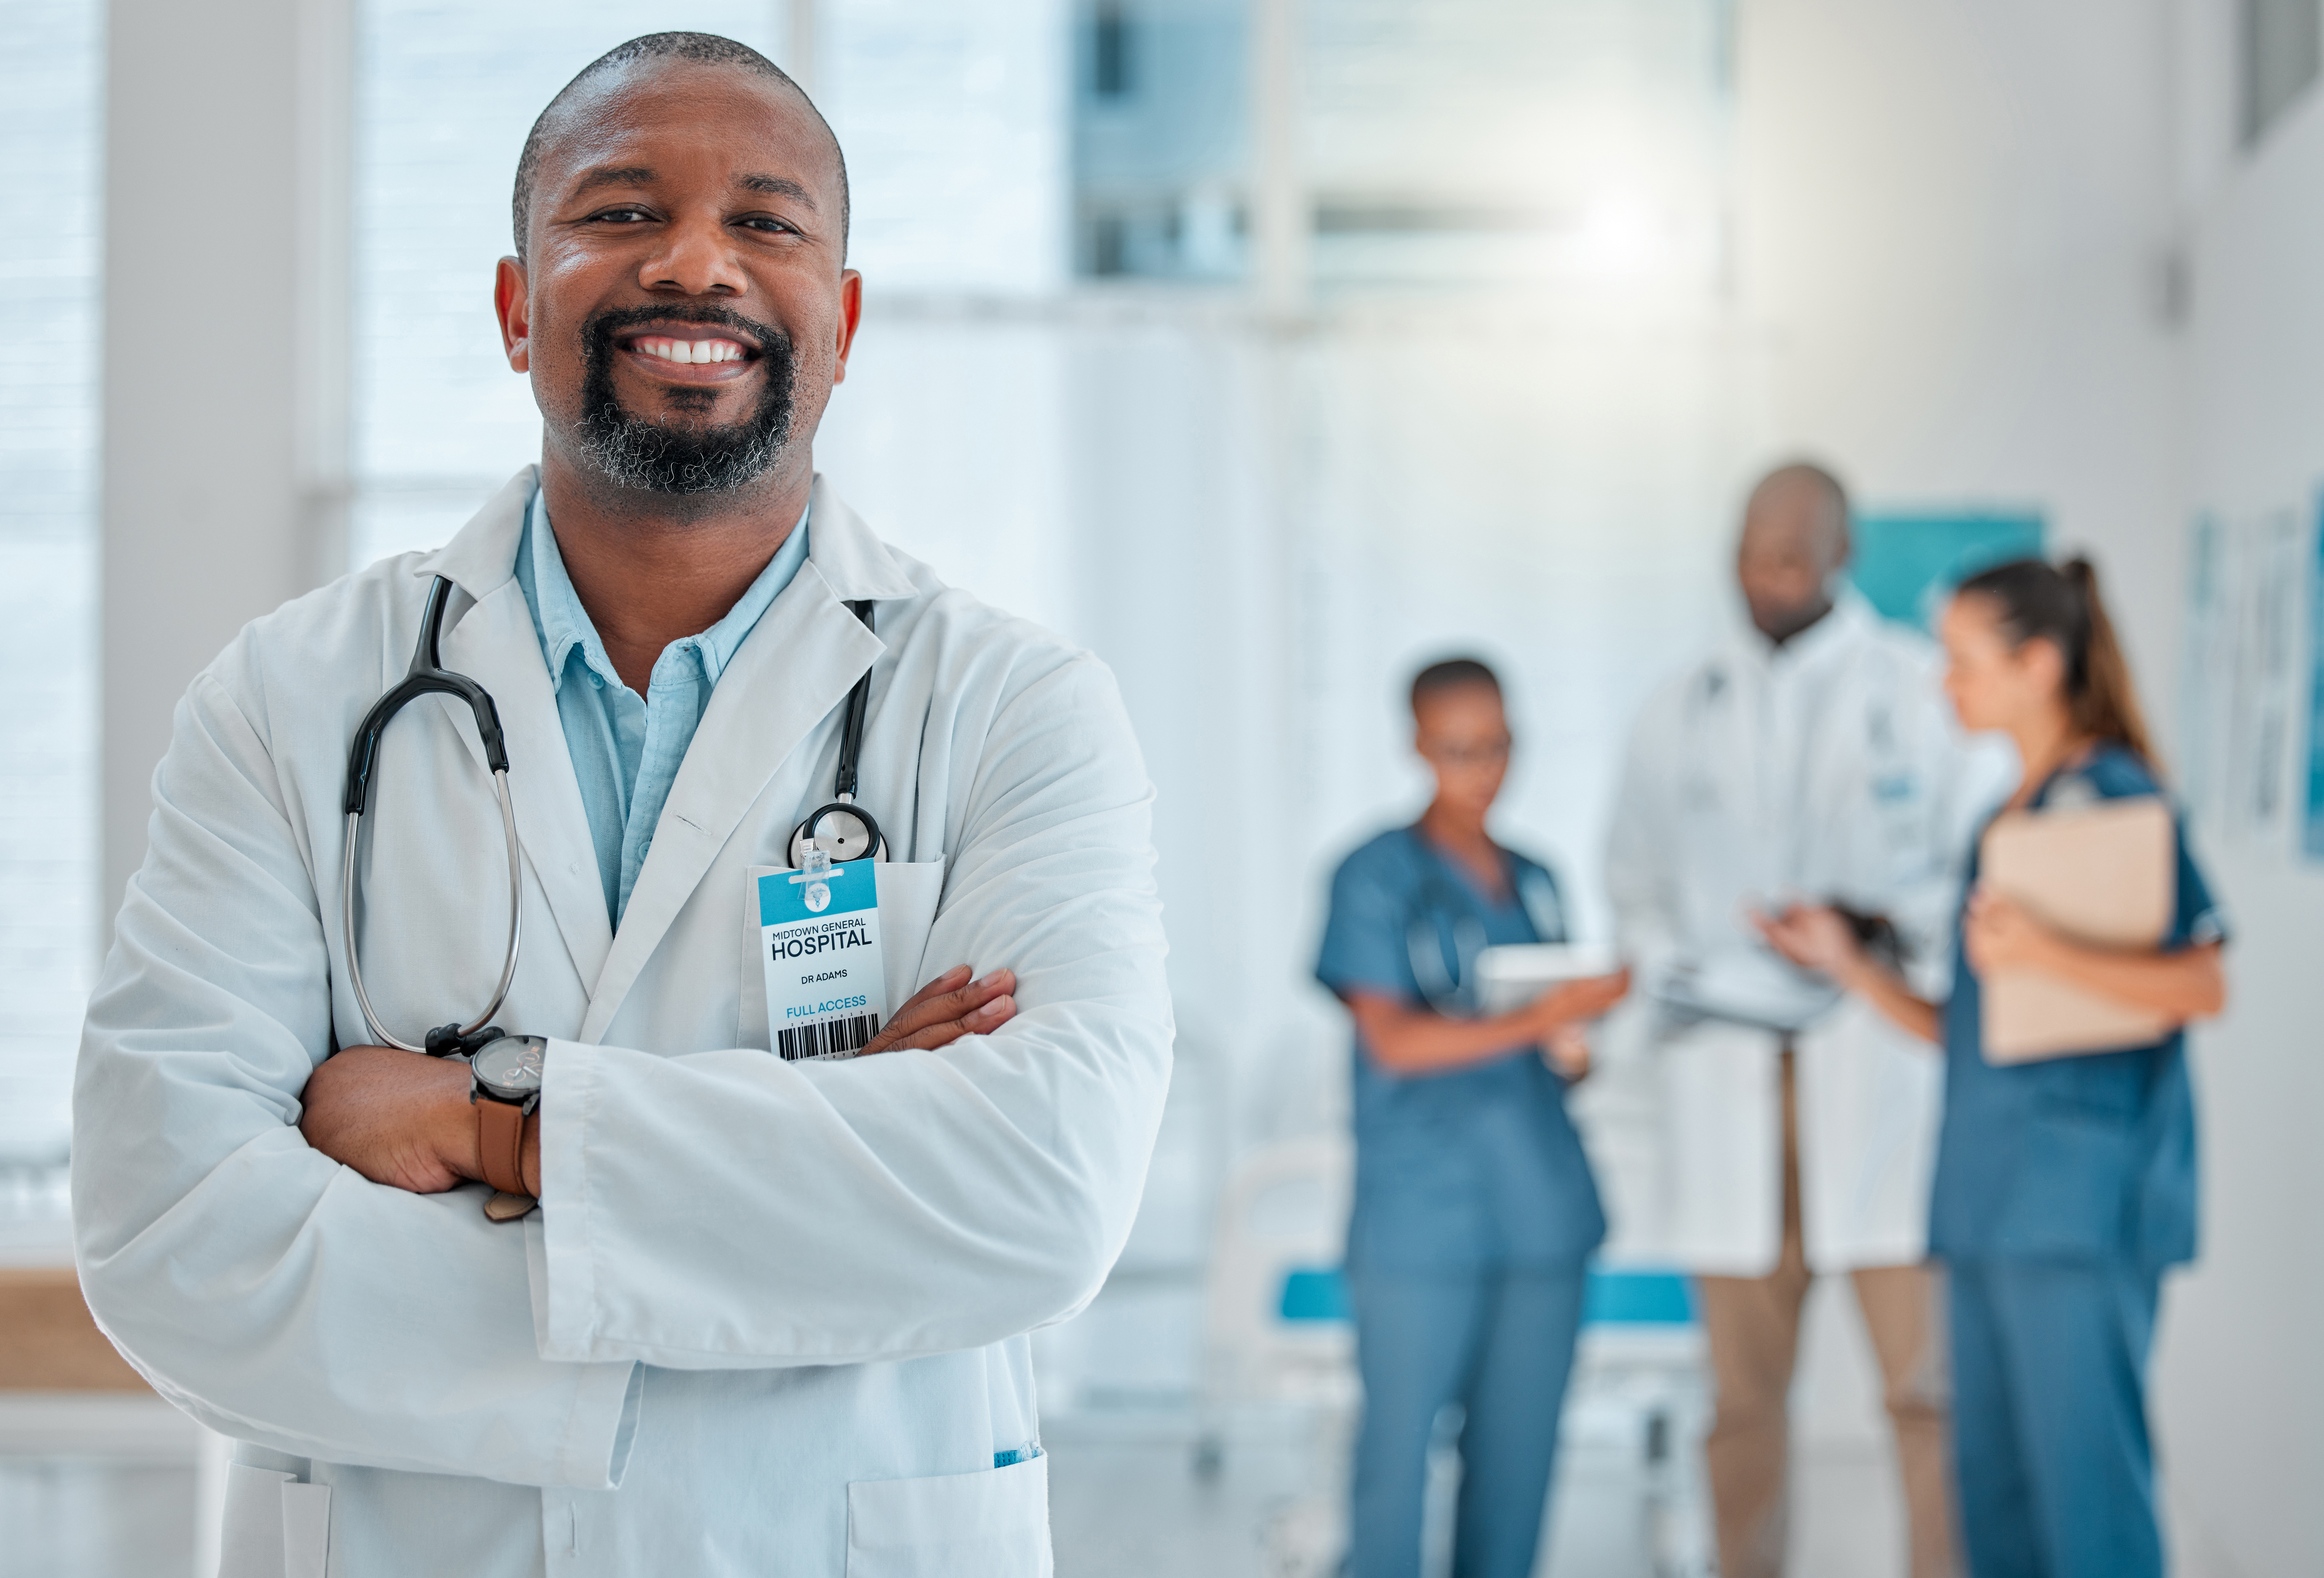 Mature african american male doctor standing with his arms crossed while working at a hospital. One